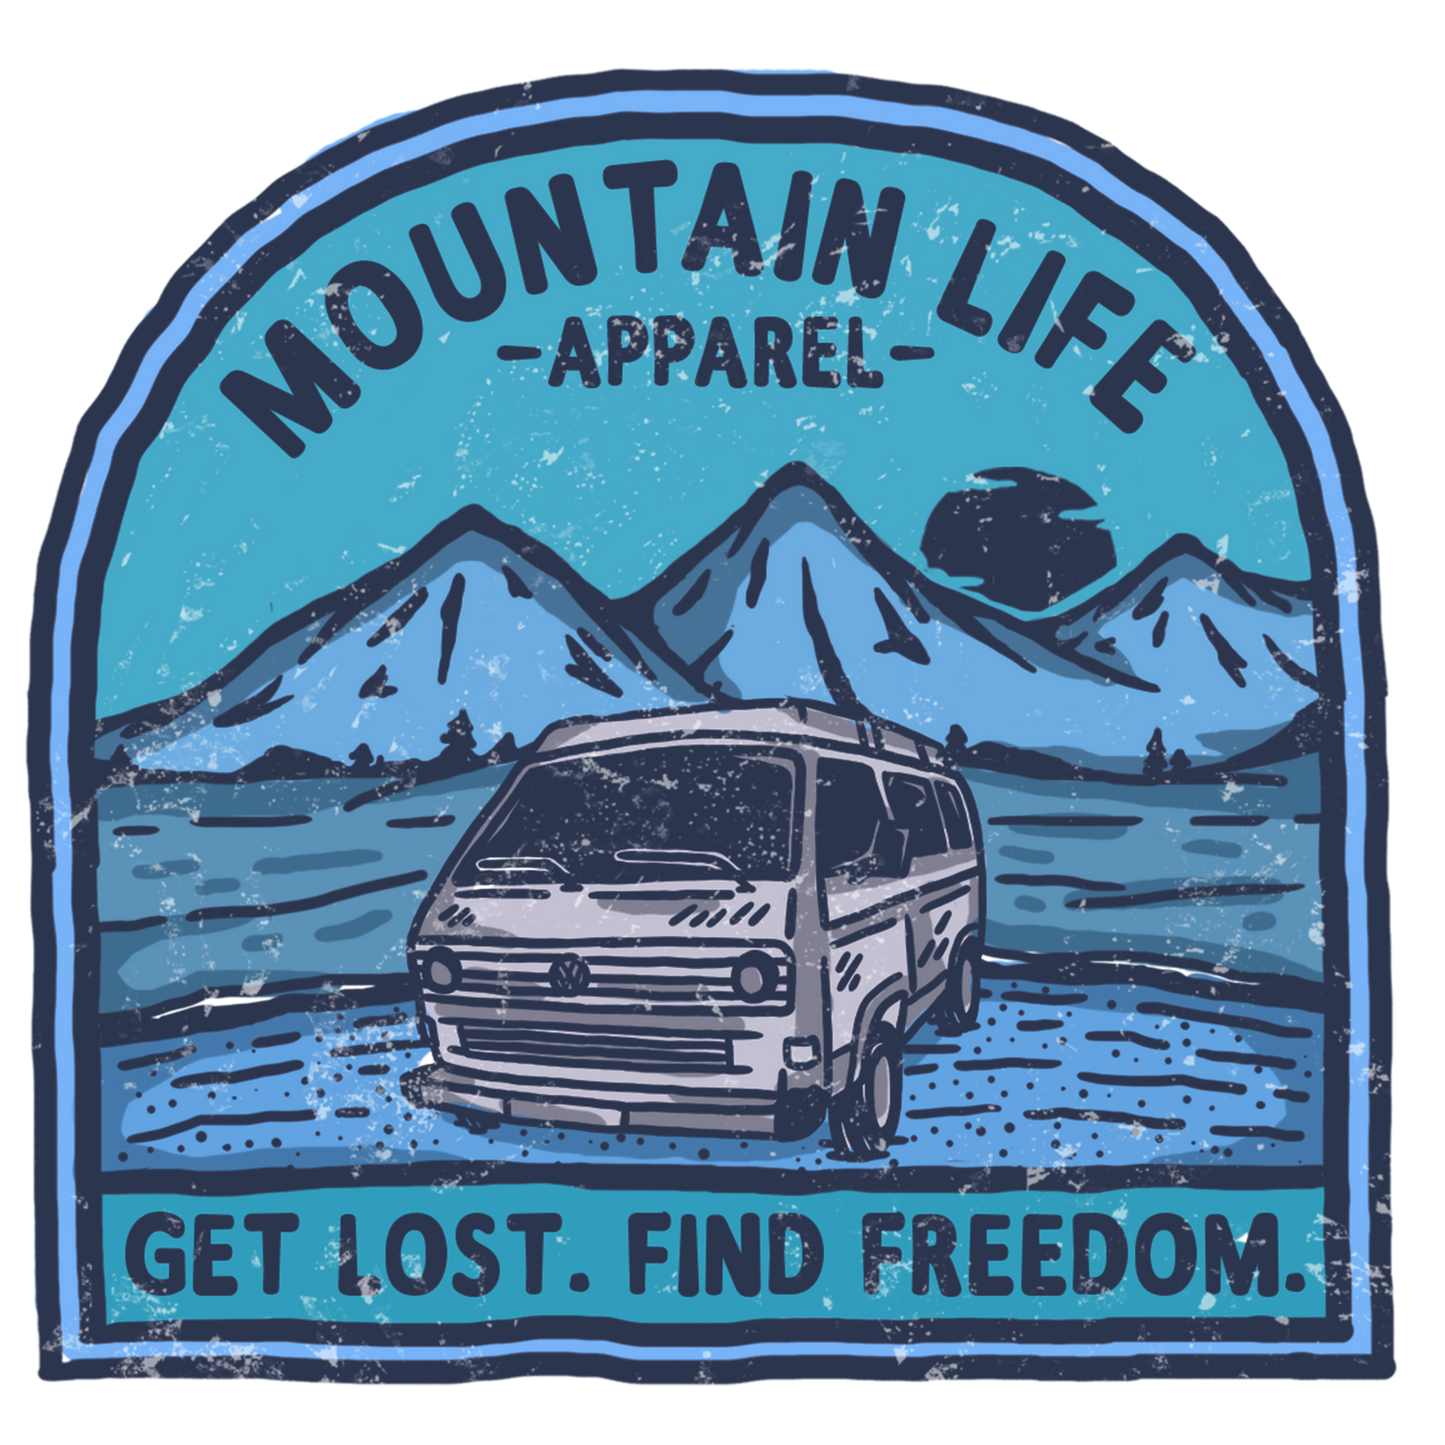 GET LOST. FIND FREEDOM. - Mountain Life Apparel - MTN LIFE